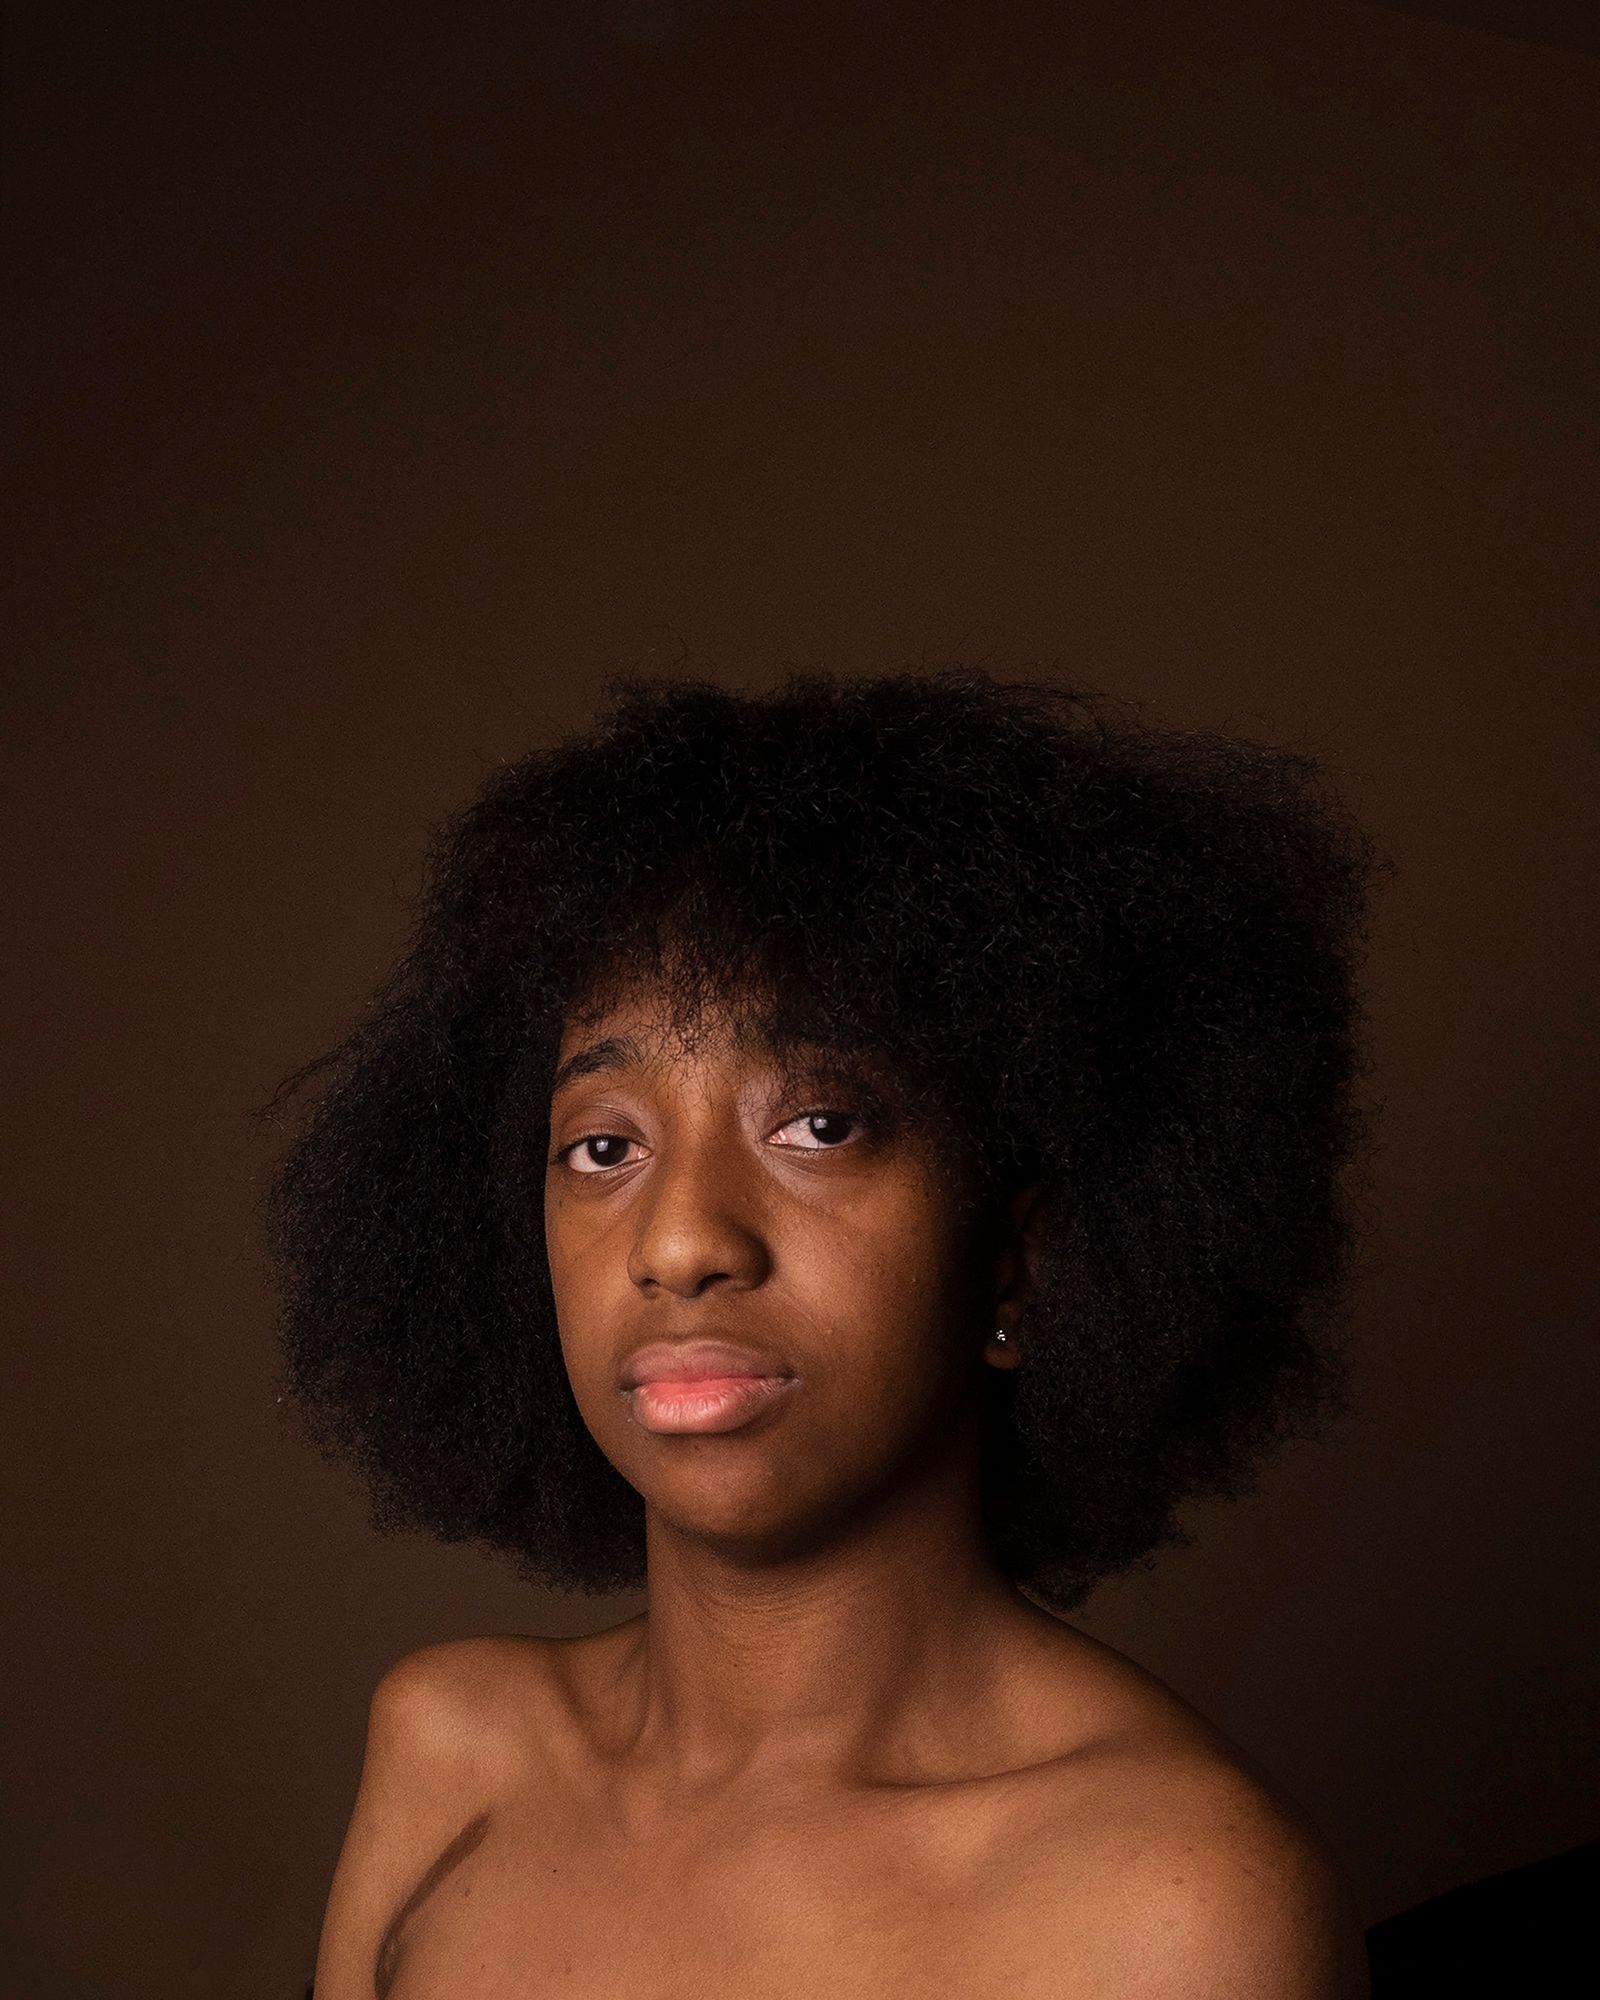 © Rita Benissan - Image from the Black is Beauty photography project